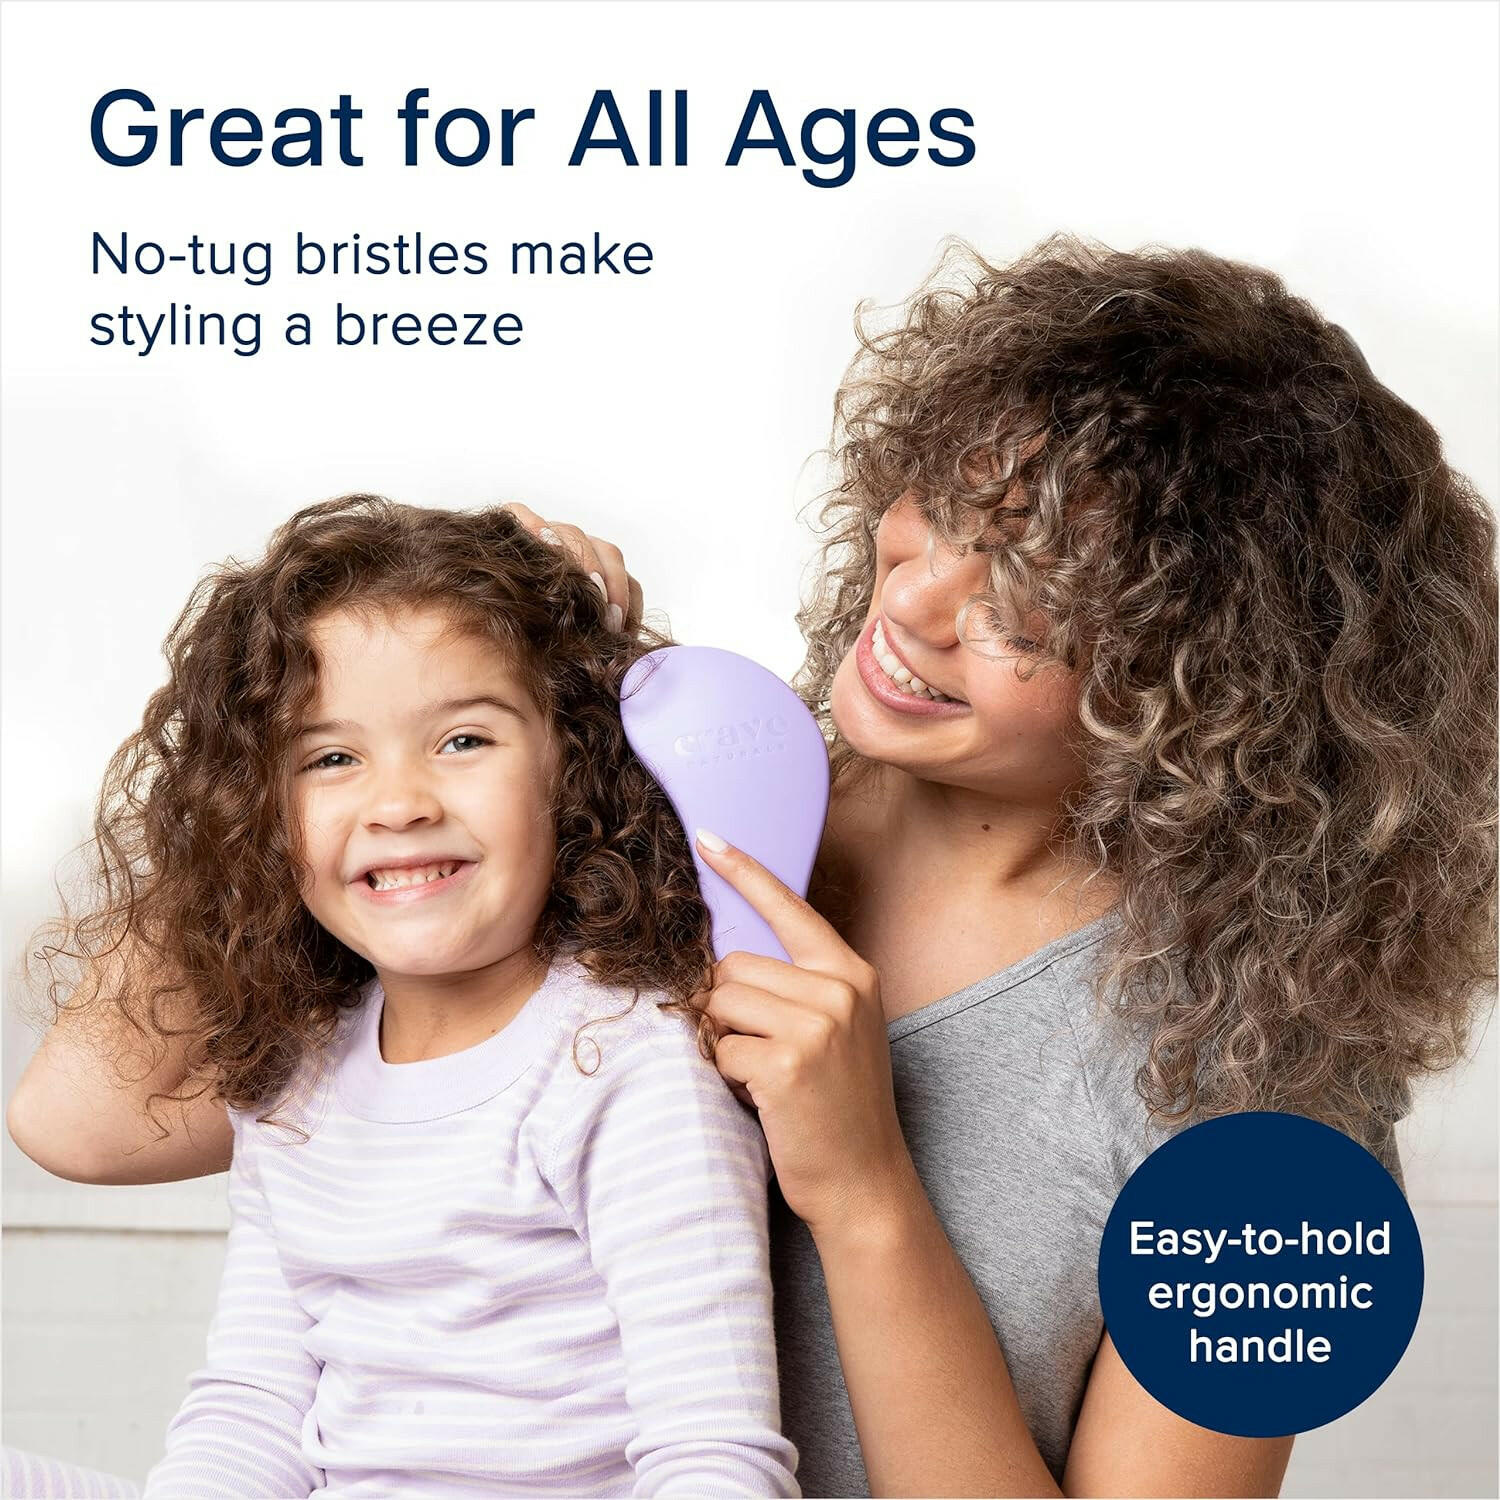 Glide Thru Detangling Brush for Kids & Adults - For Natural, Curly, Straight, Wet or Dry Hair, Purple